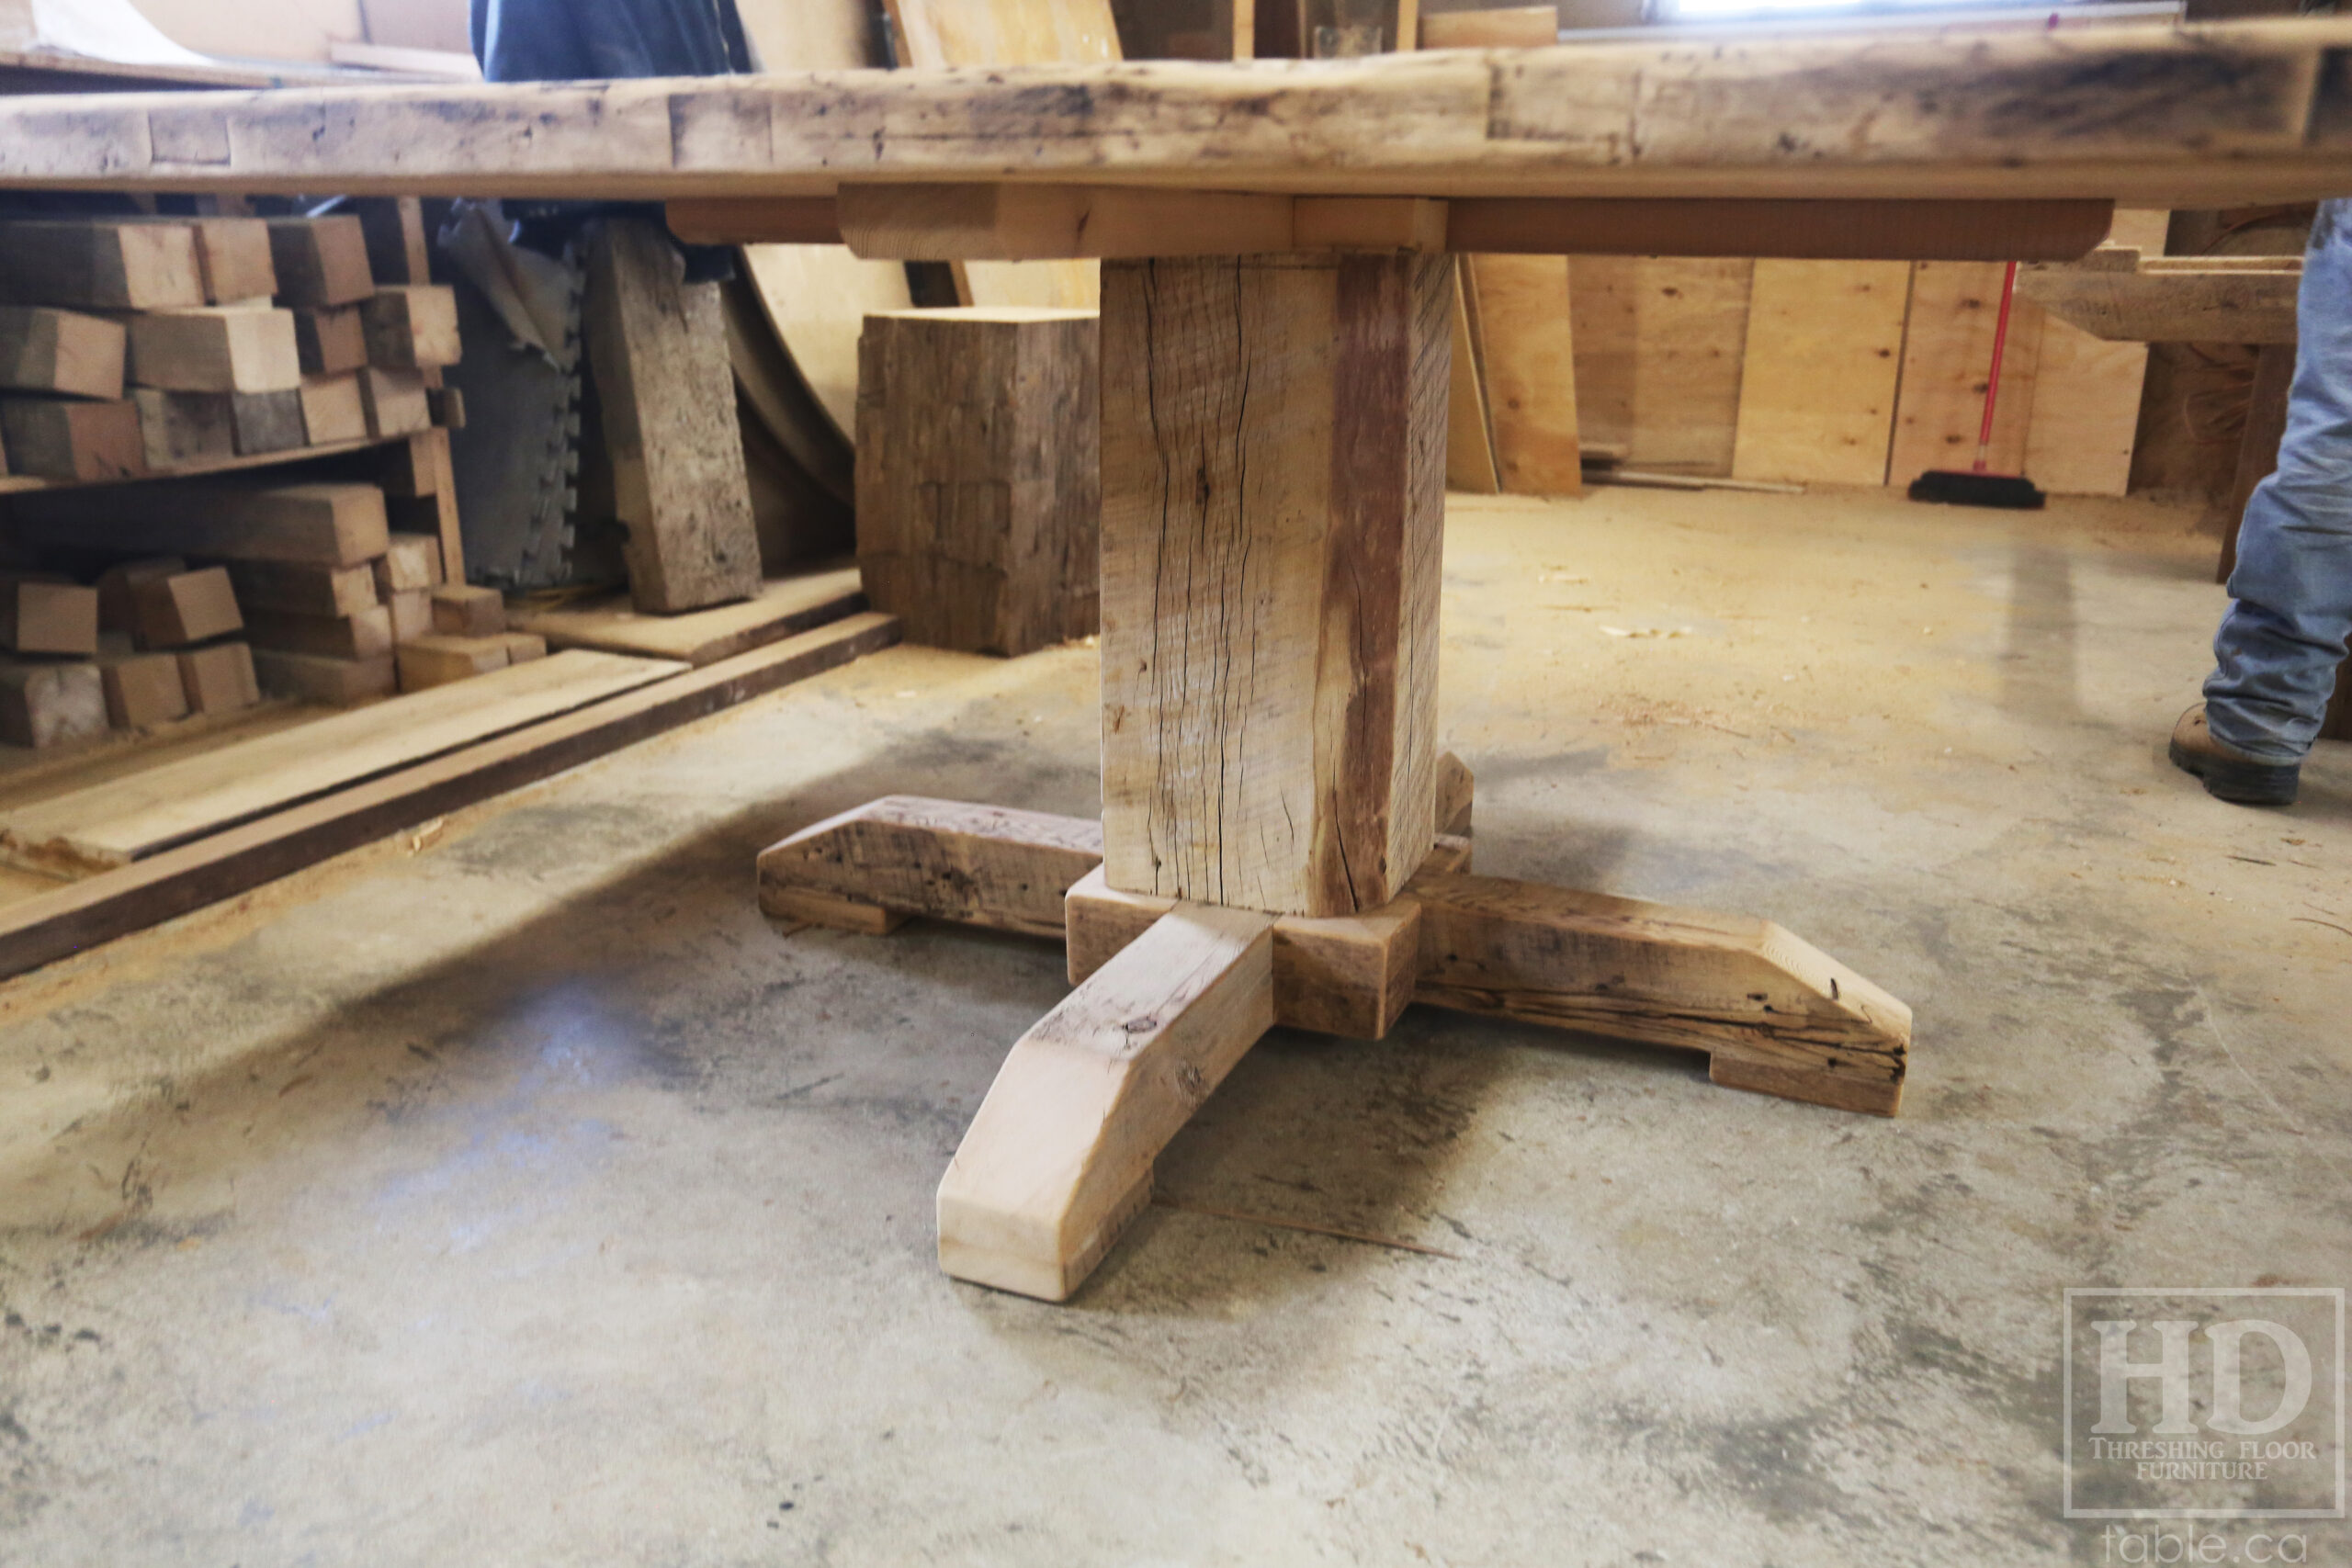 Project summary: 60” x 60” Square Reclaimed Ontario Barnwood Table we made for an Etobicoke, Ontario home – Hand-Hewn Beam Pedestal Base - Old Growth Hemlock Threshing Floor Construction – Original edges & distressing maintained – Bread Edge Ends - Premium epoxy + matte polyurethane finish – www.table.ca